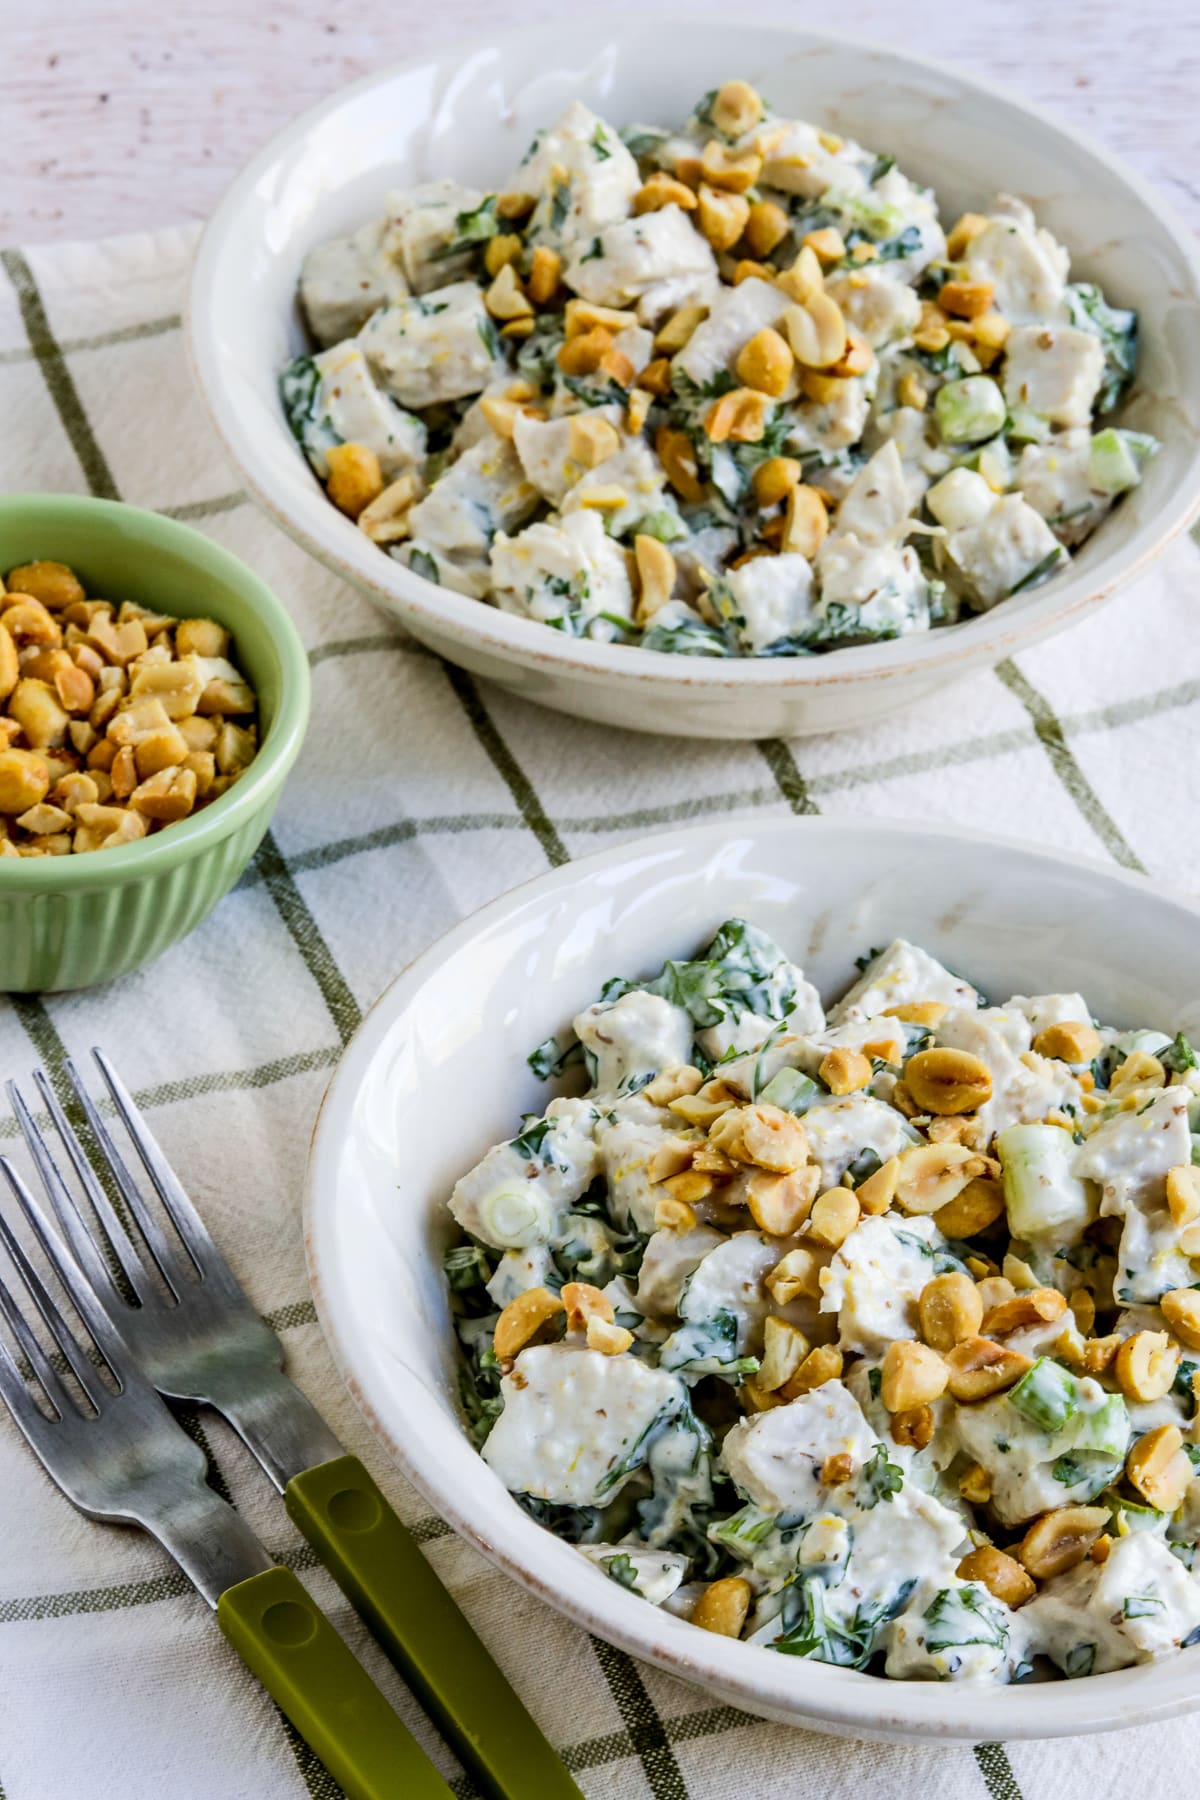 Spicy Chicken Salad with Ginger and Lemon shown in two bowls with forks and bowl of peanuts.